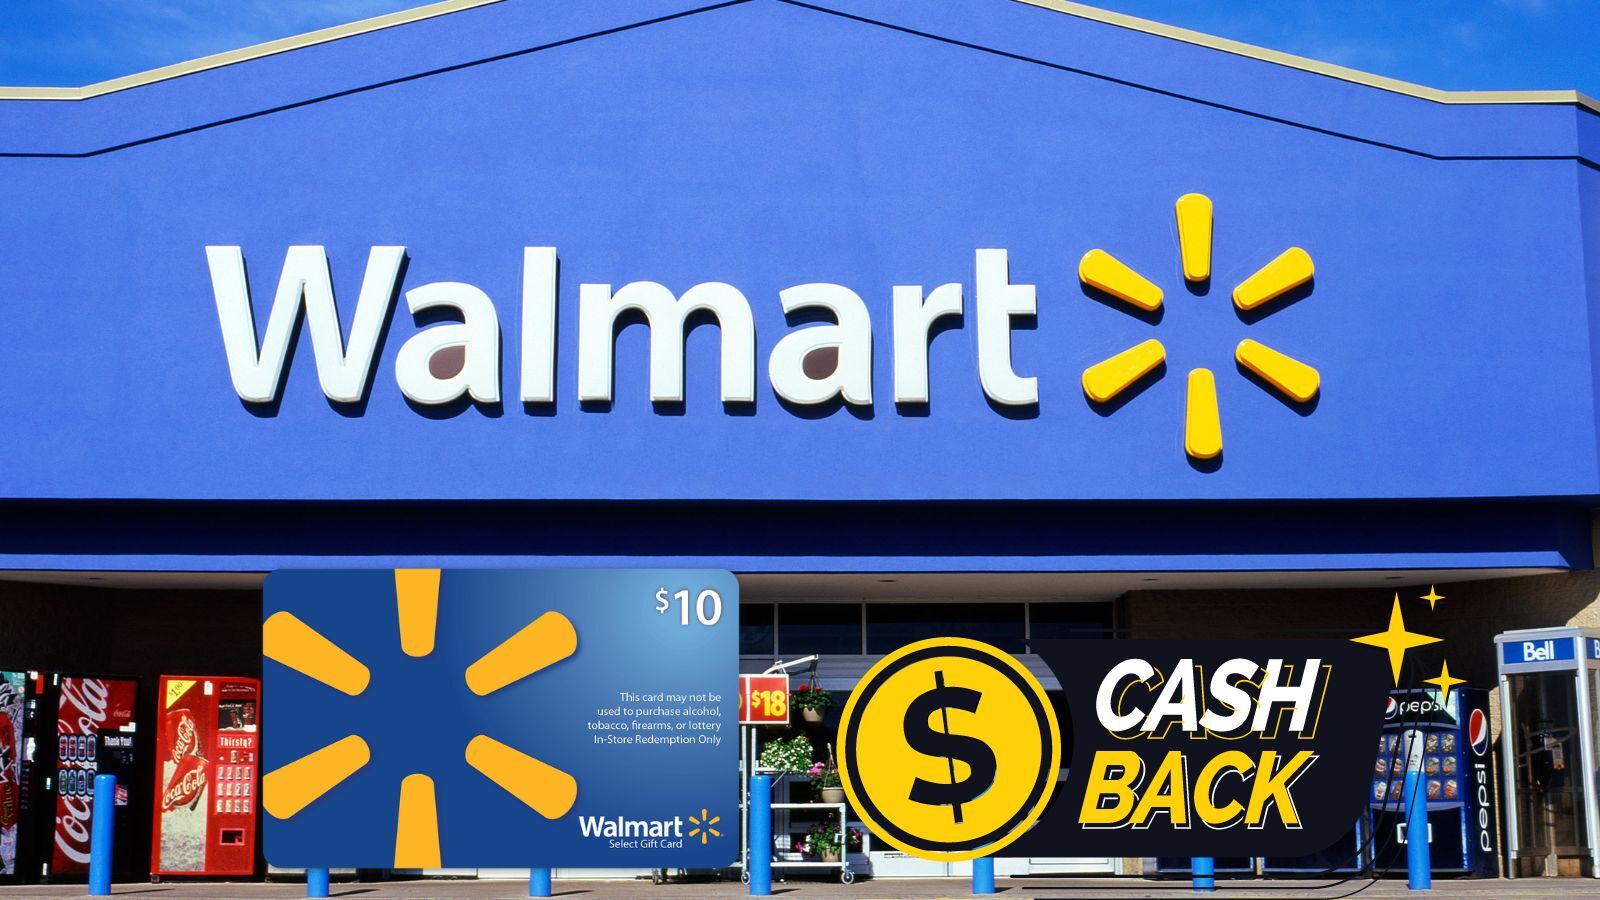 How To Get Cashback From A Walmart Gift Card? (Tips You Shouldn't Miss!)